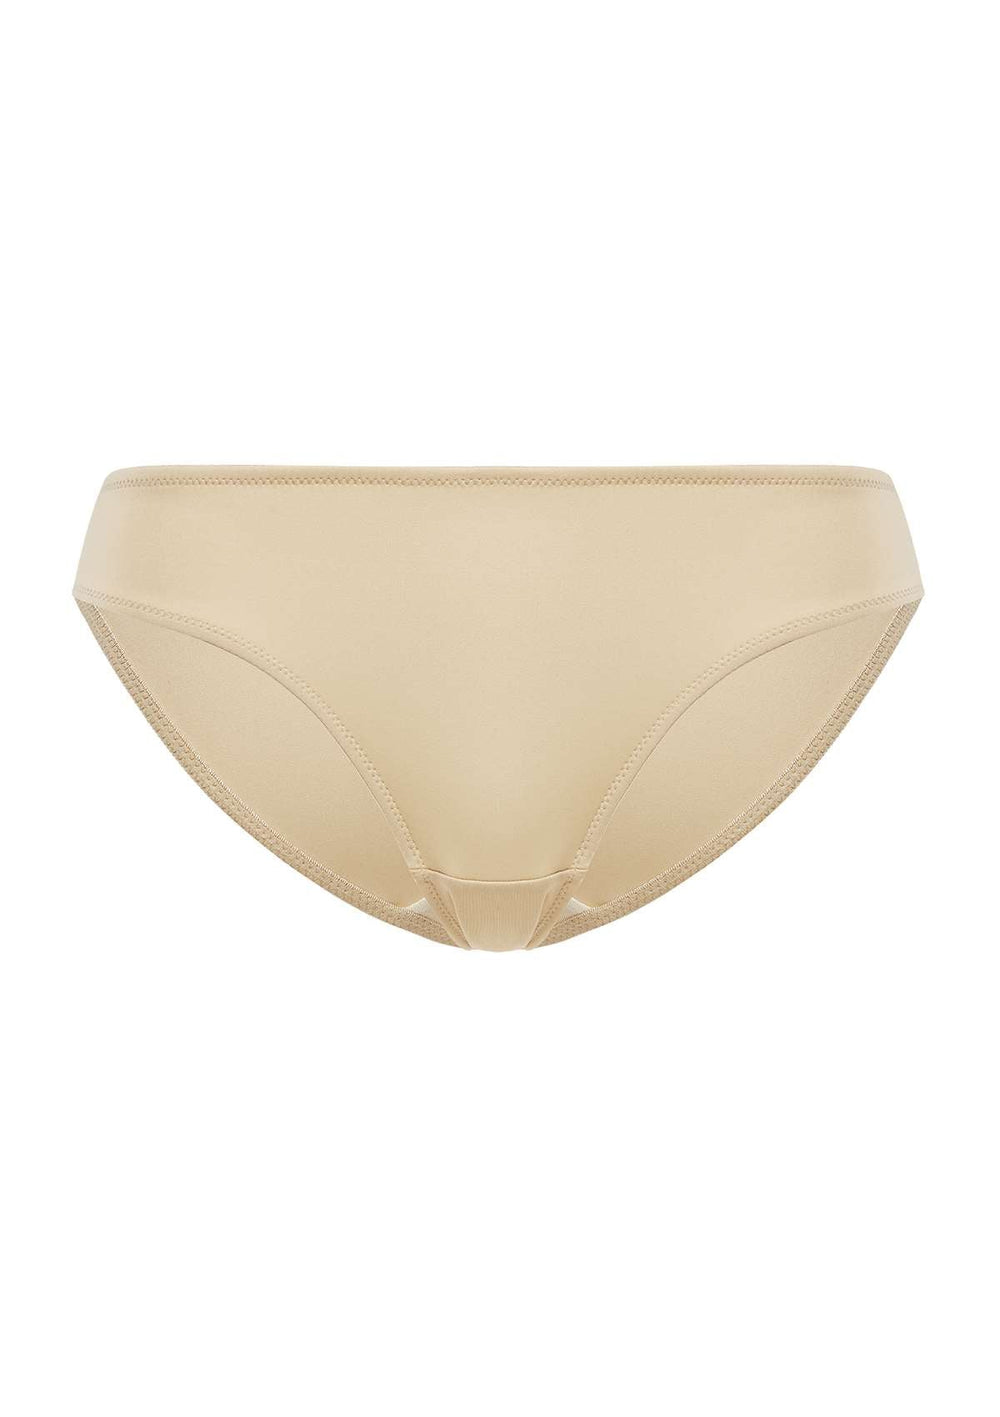 HSIA Patricia Seamless Soft Invisible Stretch Panty - Discreet Style